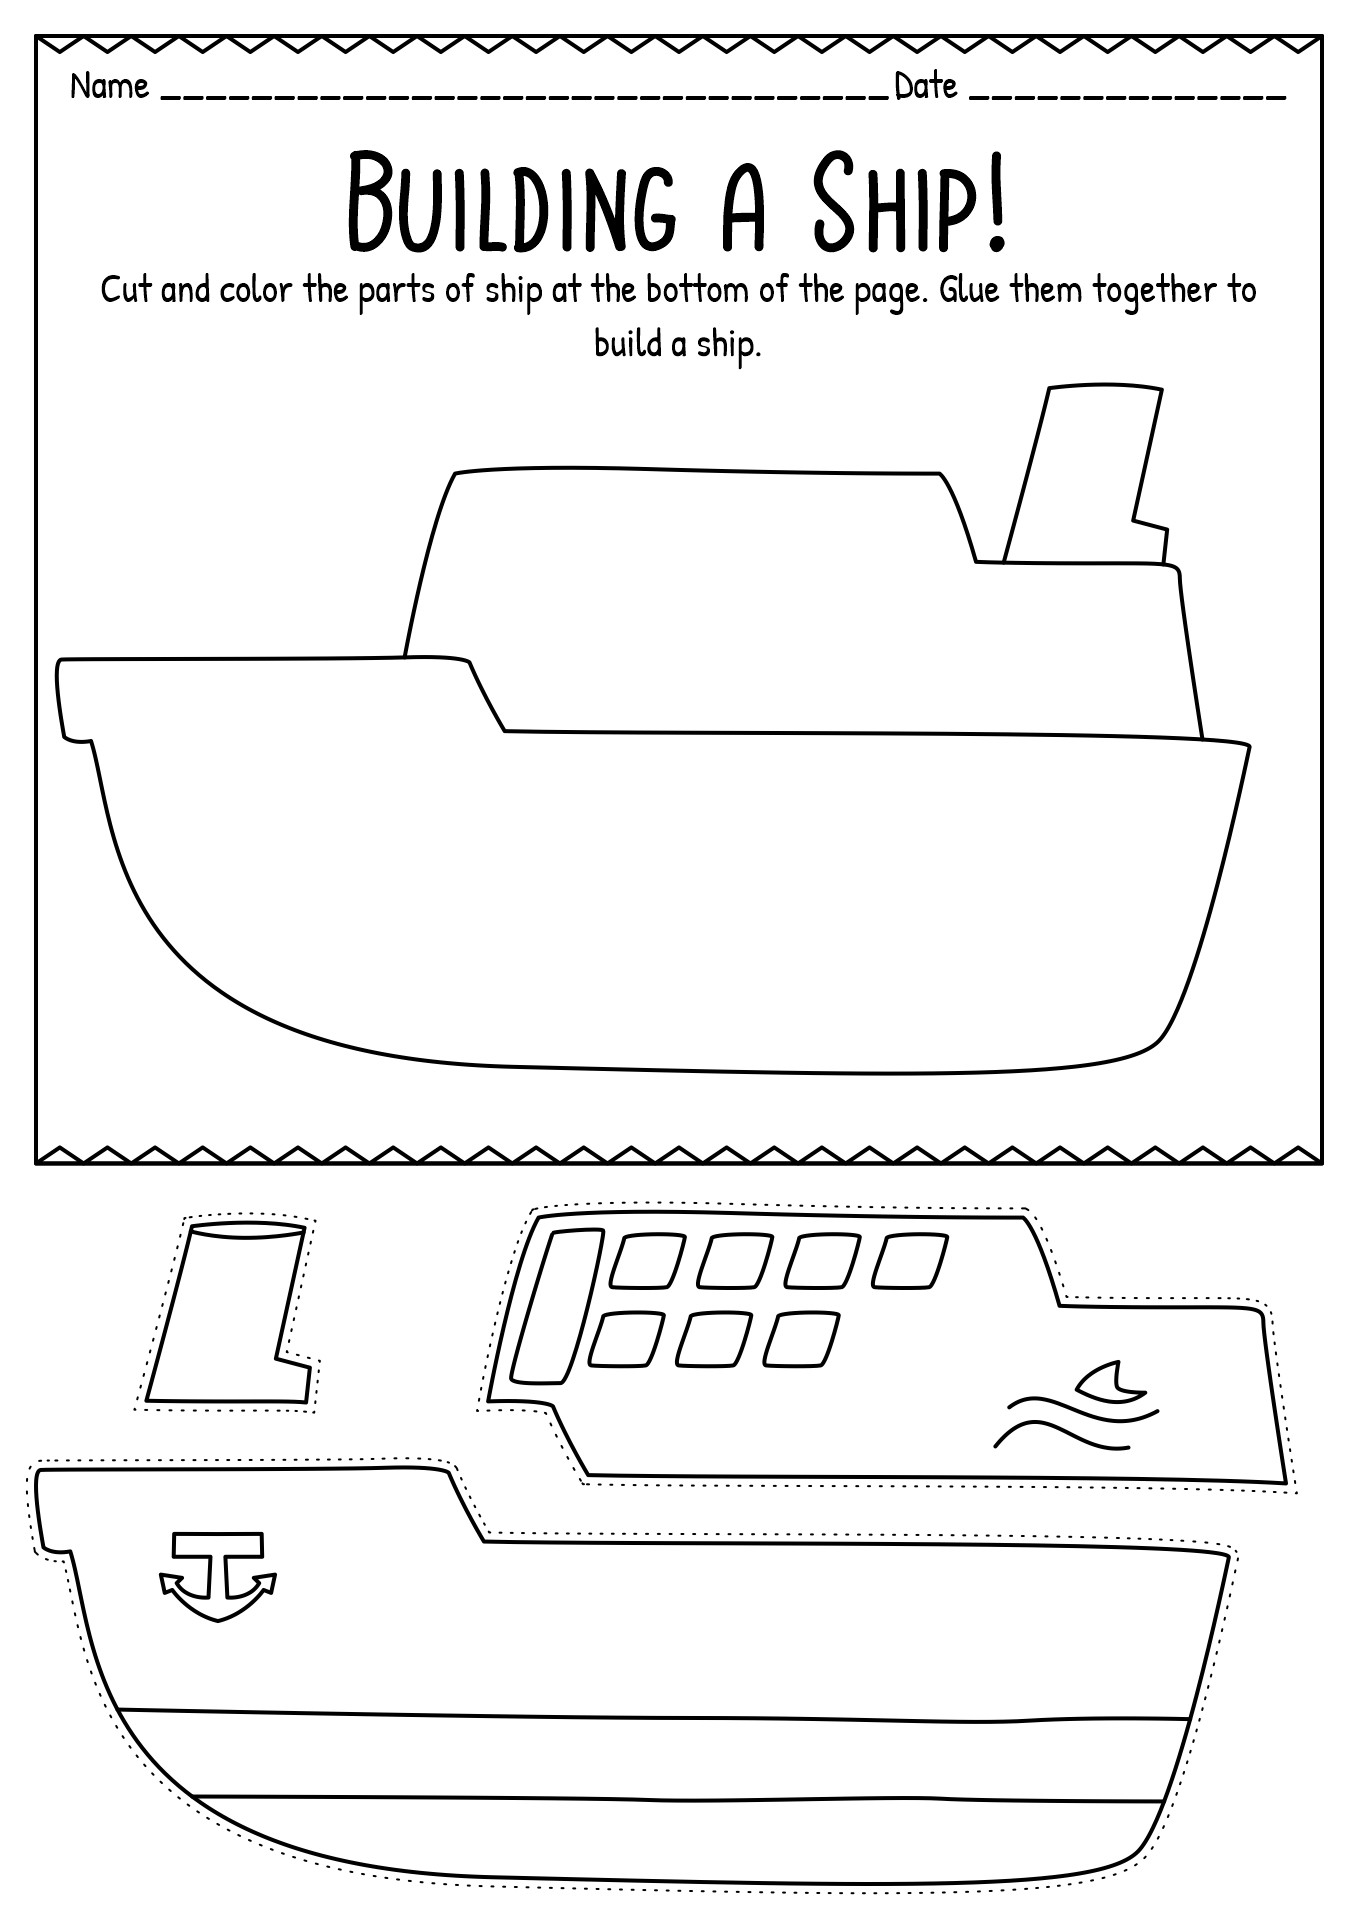 Cut and Paste Activity Worksheets Image